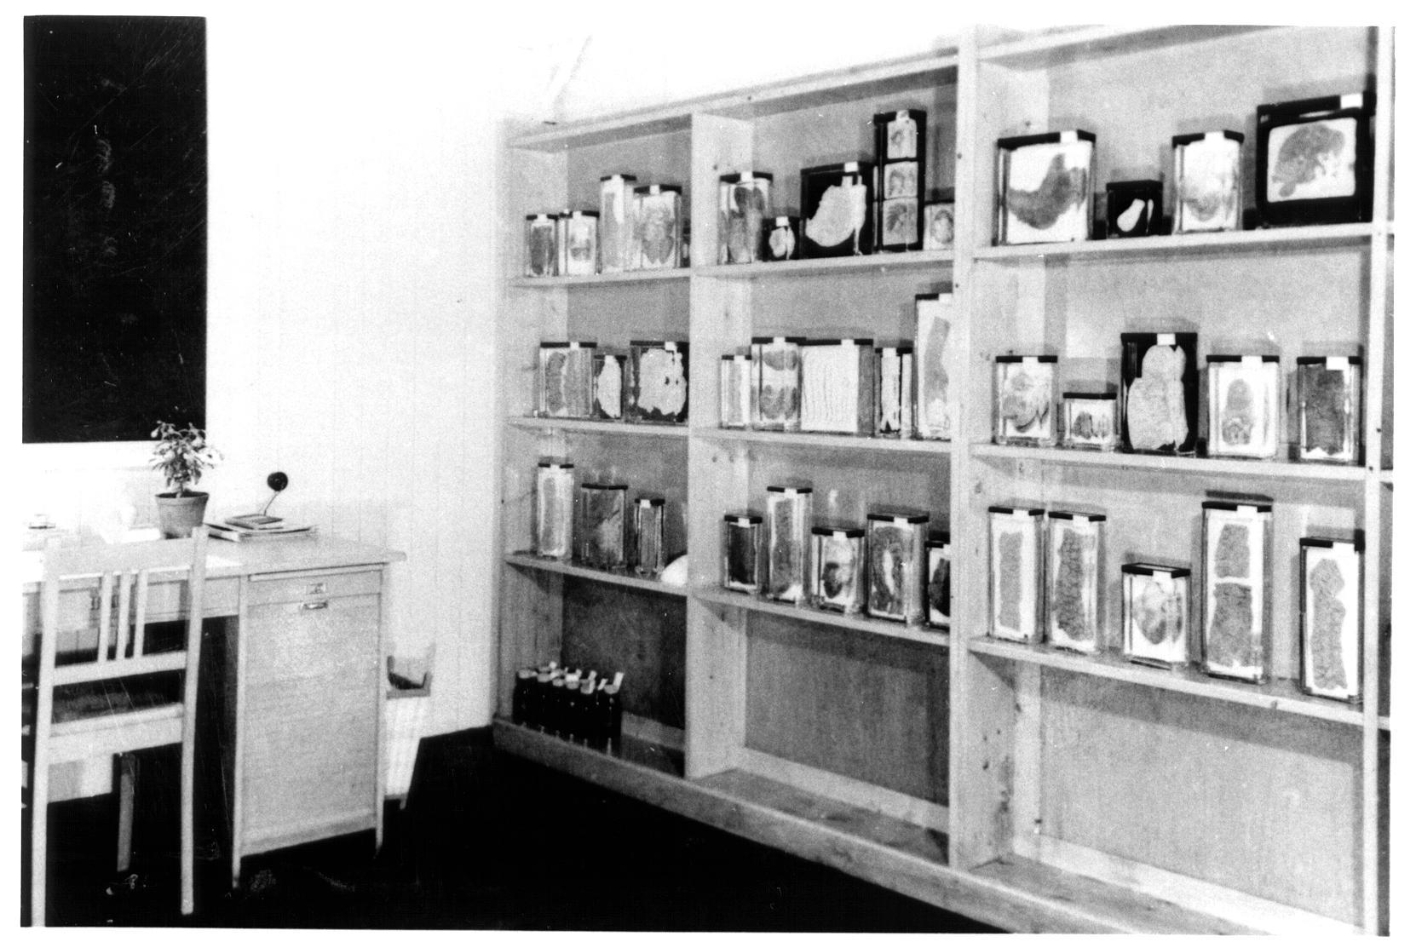 Photo from the center of the pathology office. The largest part of the room is taken up by a wall-sized shelf with organ preparations. To the right of it is a small desk.